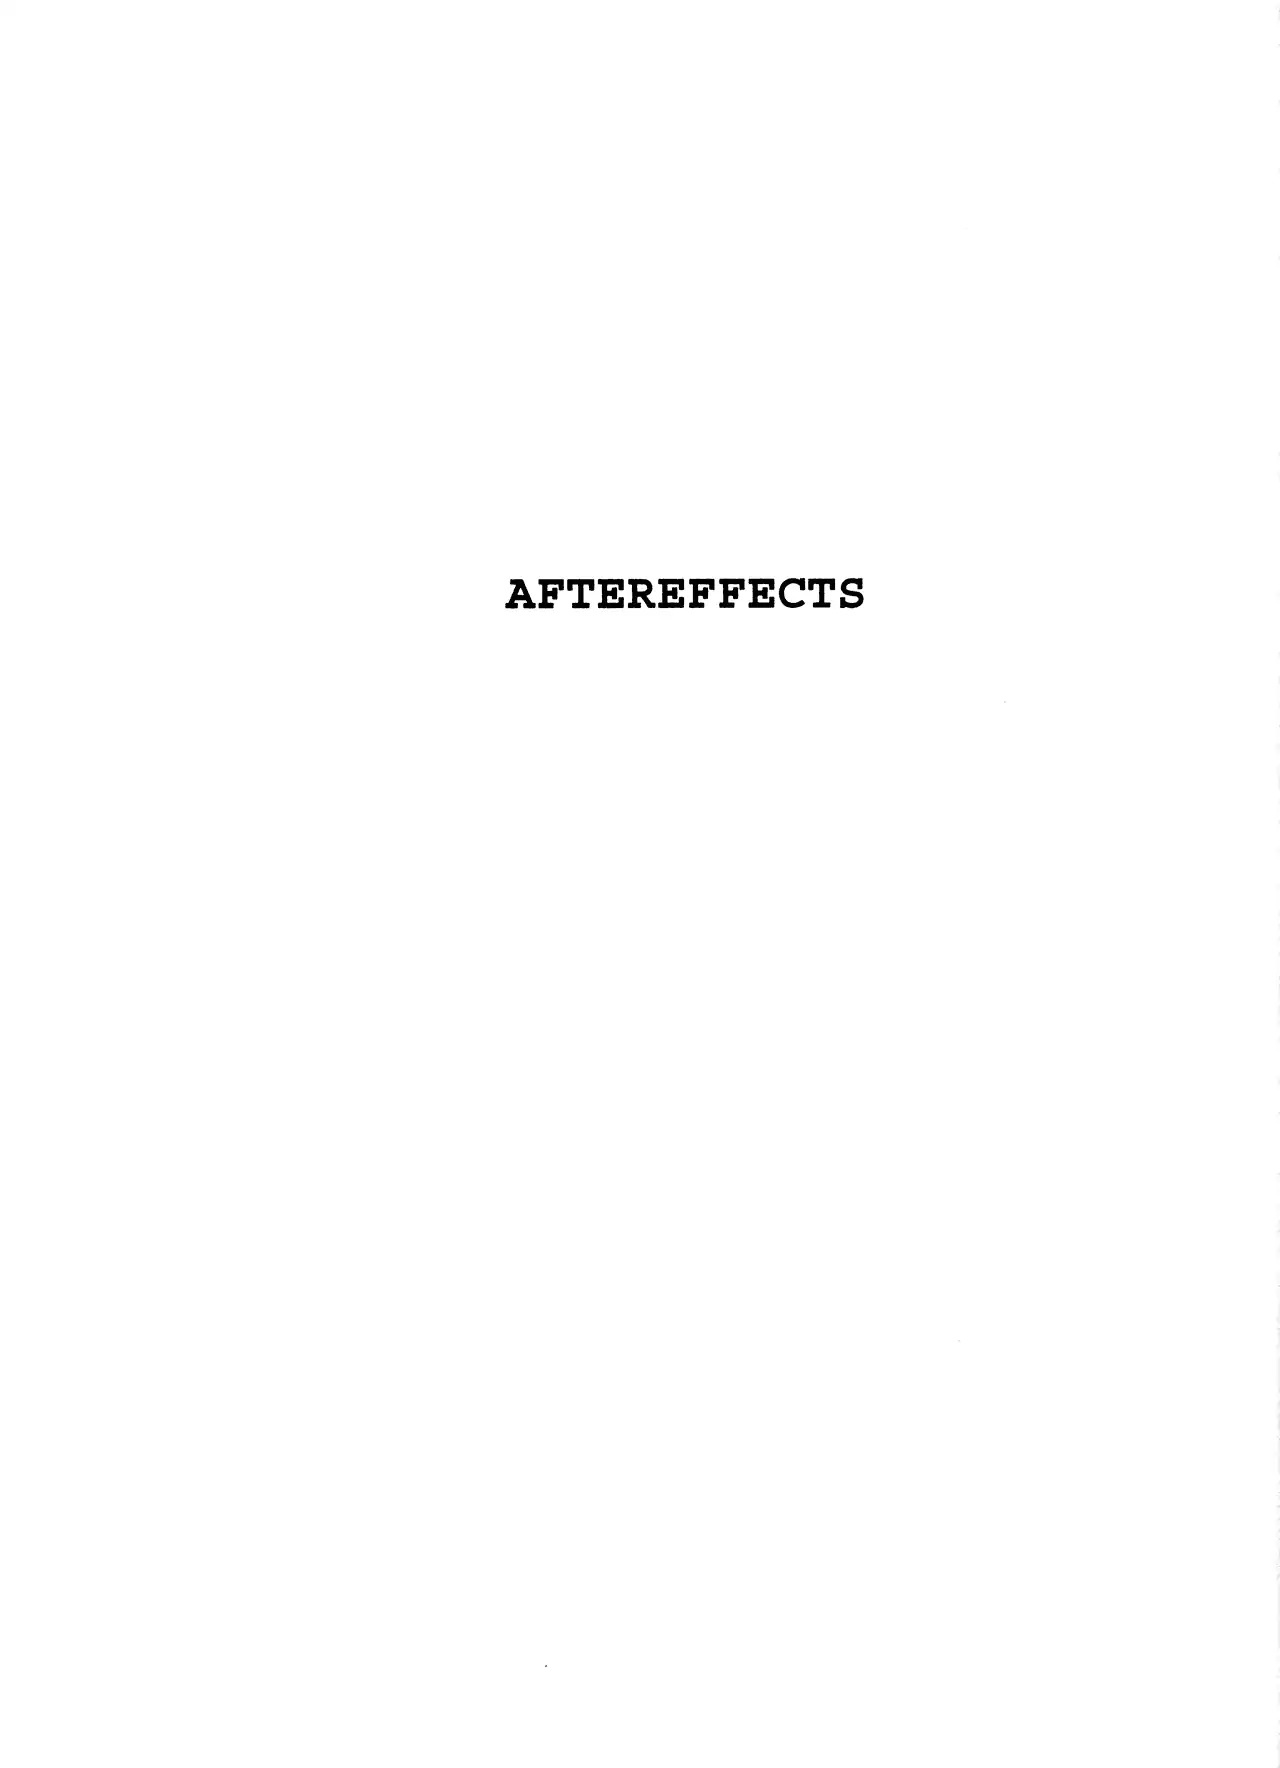 Black Jack Vol.13 Chapter 7: Aftereffects - Picture 1